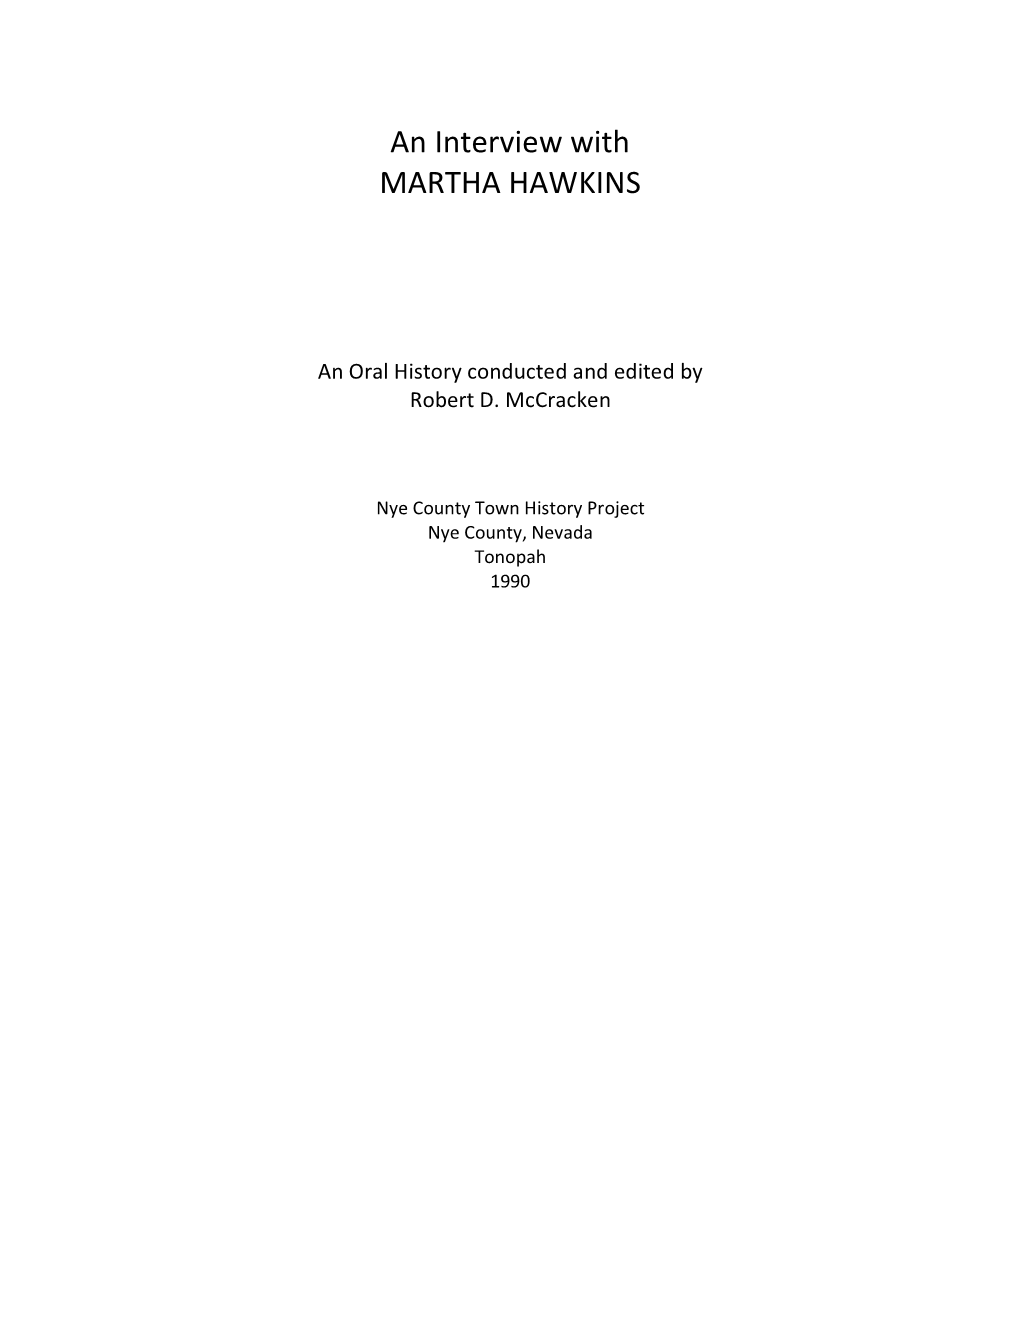 An Interview with MARTHA HAWKINS